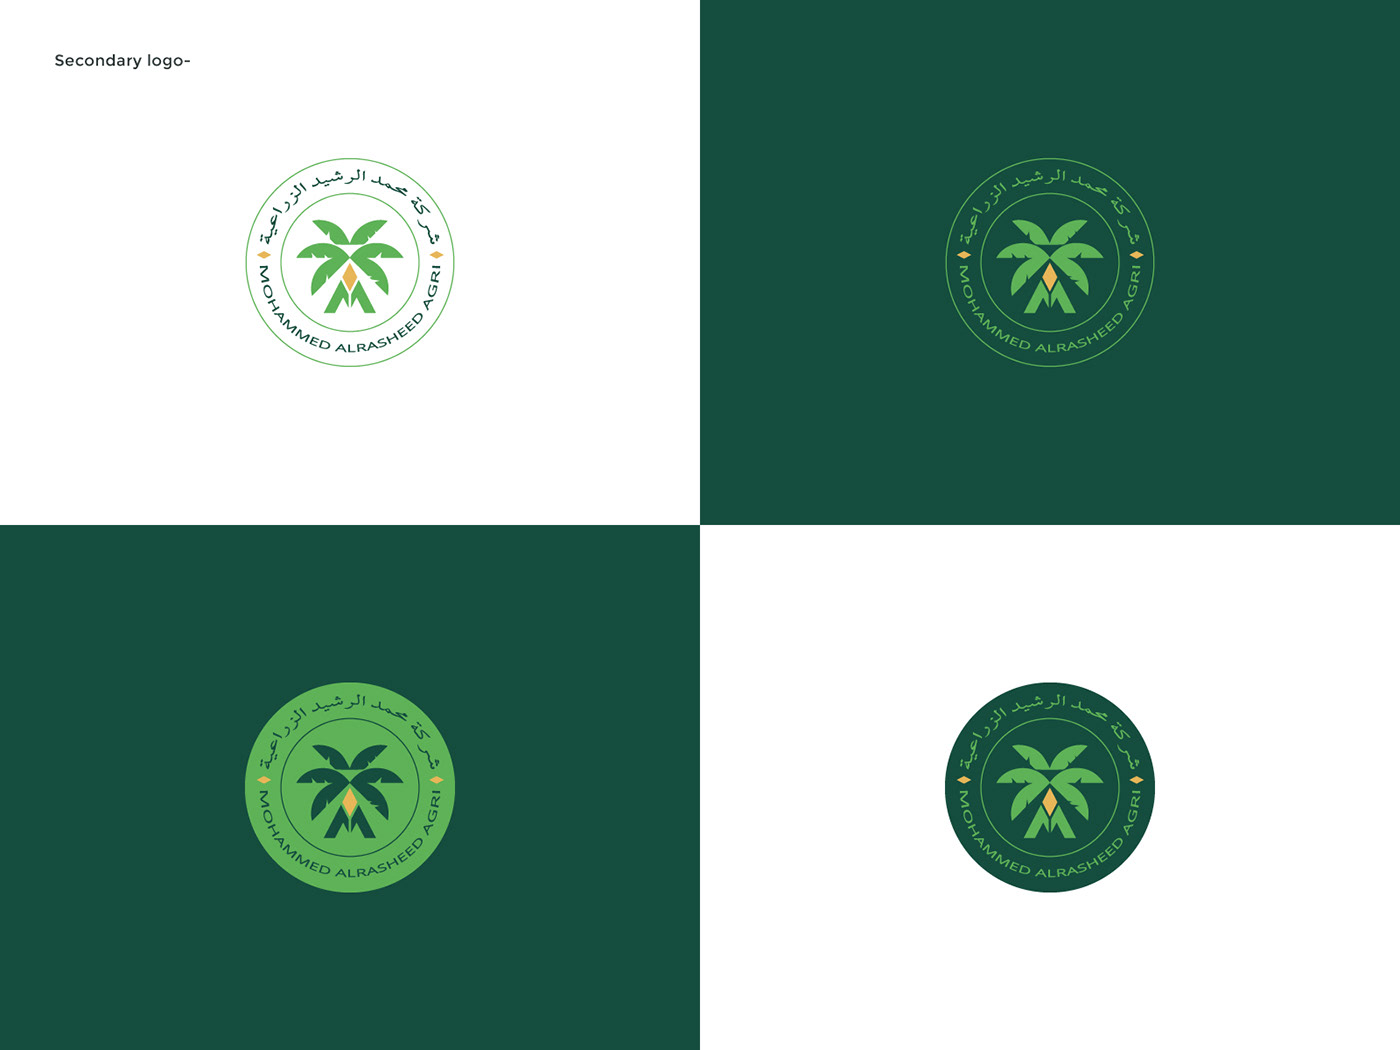 agriculture brand guidelines branding  Case Study dates export farm Import palm tree logo